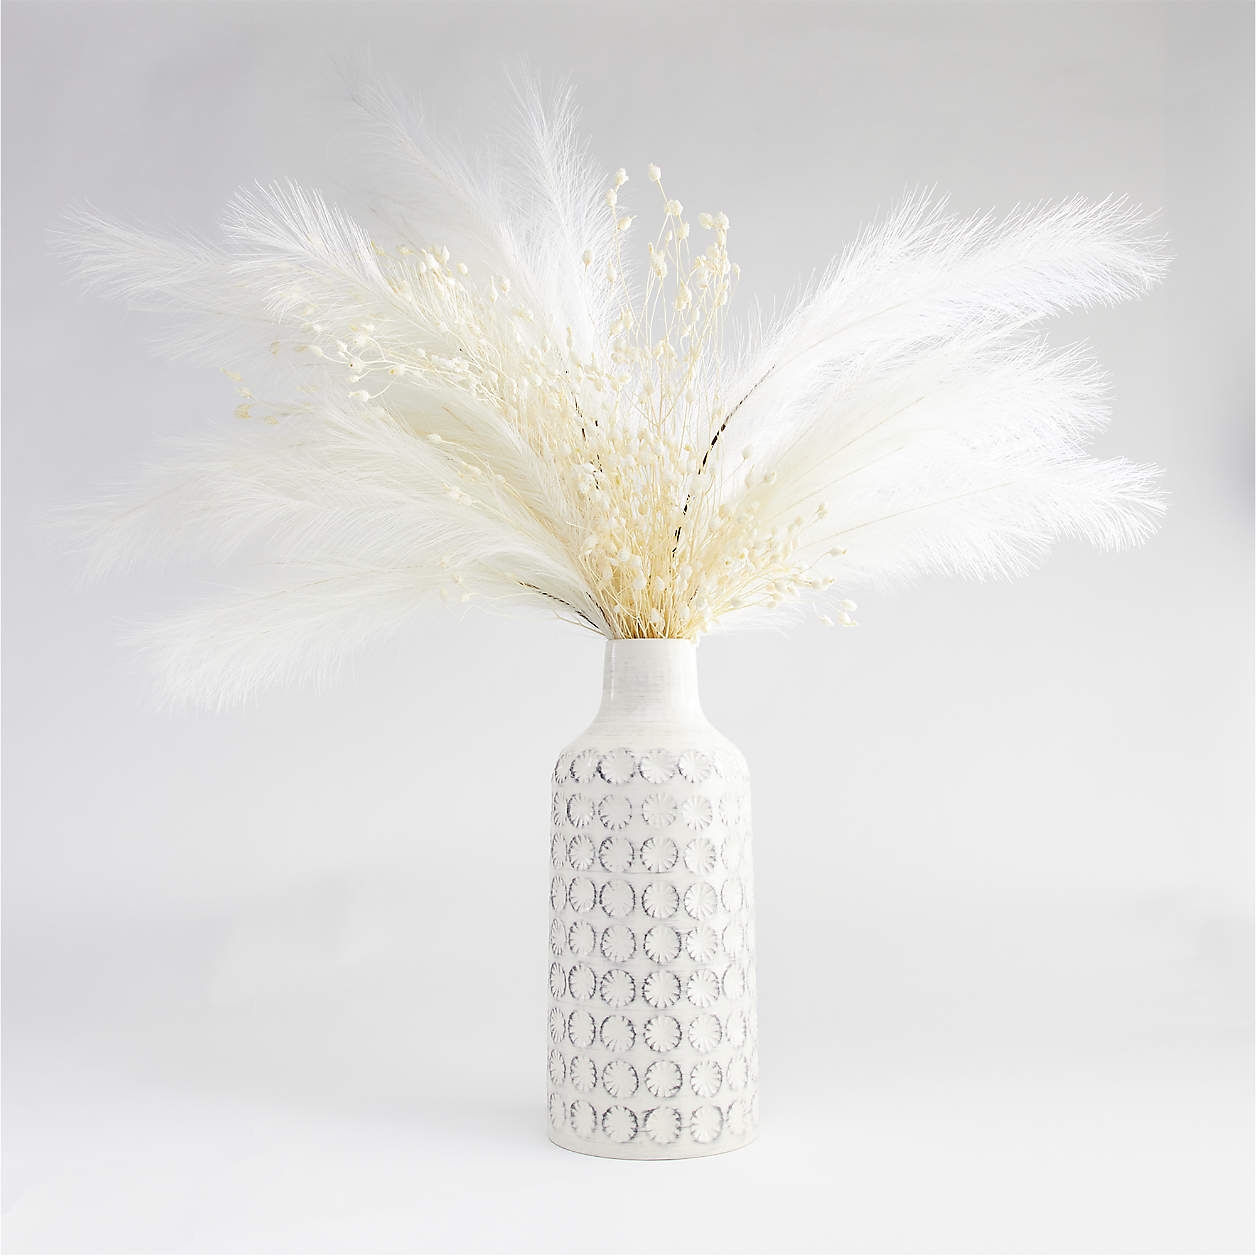 Faux Ivory Pampas Grass Bunch - Image 5